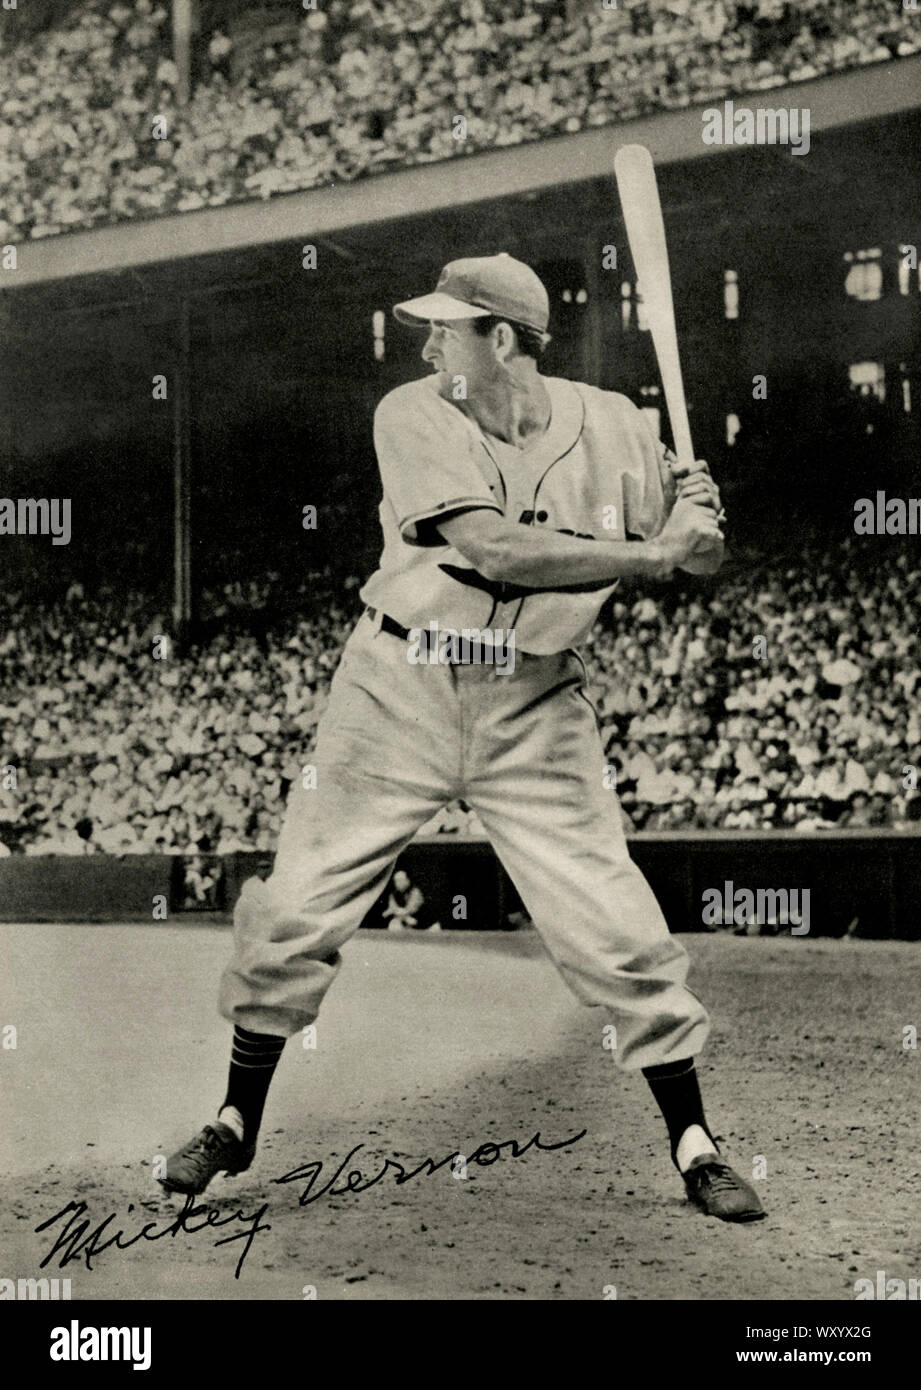 Vintage photograph of baseball player Mickey Vernon who was active in the  Major Leagues 1940s and 50s and became a manager in the 1960s. Stock Photo